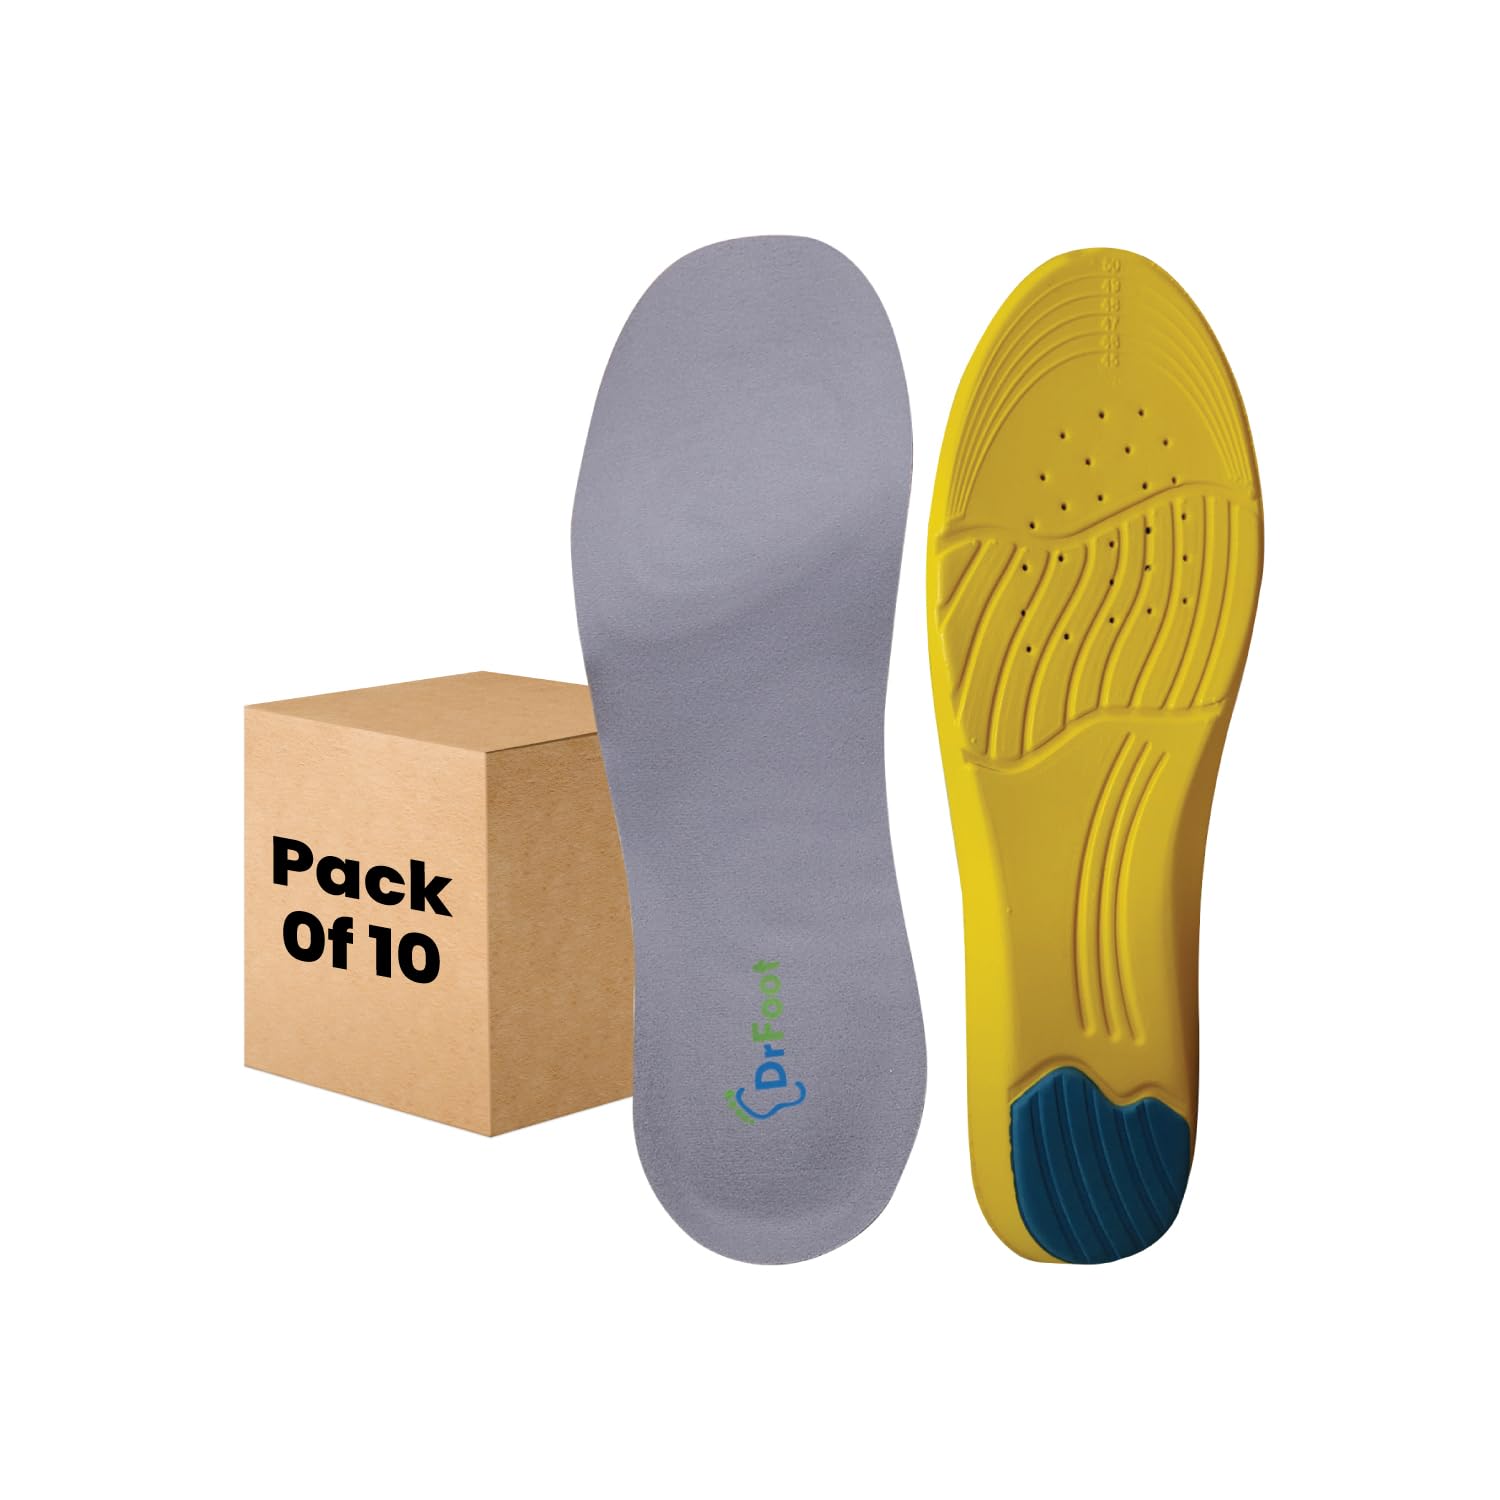 Dr Foot Gel Insoles Pair | For Walking, Running, Sports Shoes | All Day Comfort Shoe Inserts With Dual Gel Technology | Ideal Full-Length Sole For Every Shoe For Unisex- 1 Pair (Size - M) (Pack of 10)